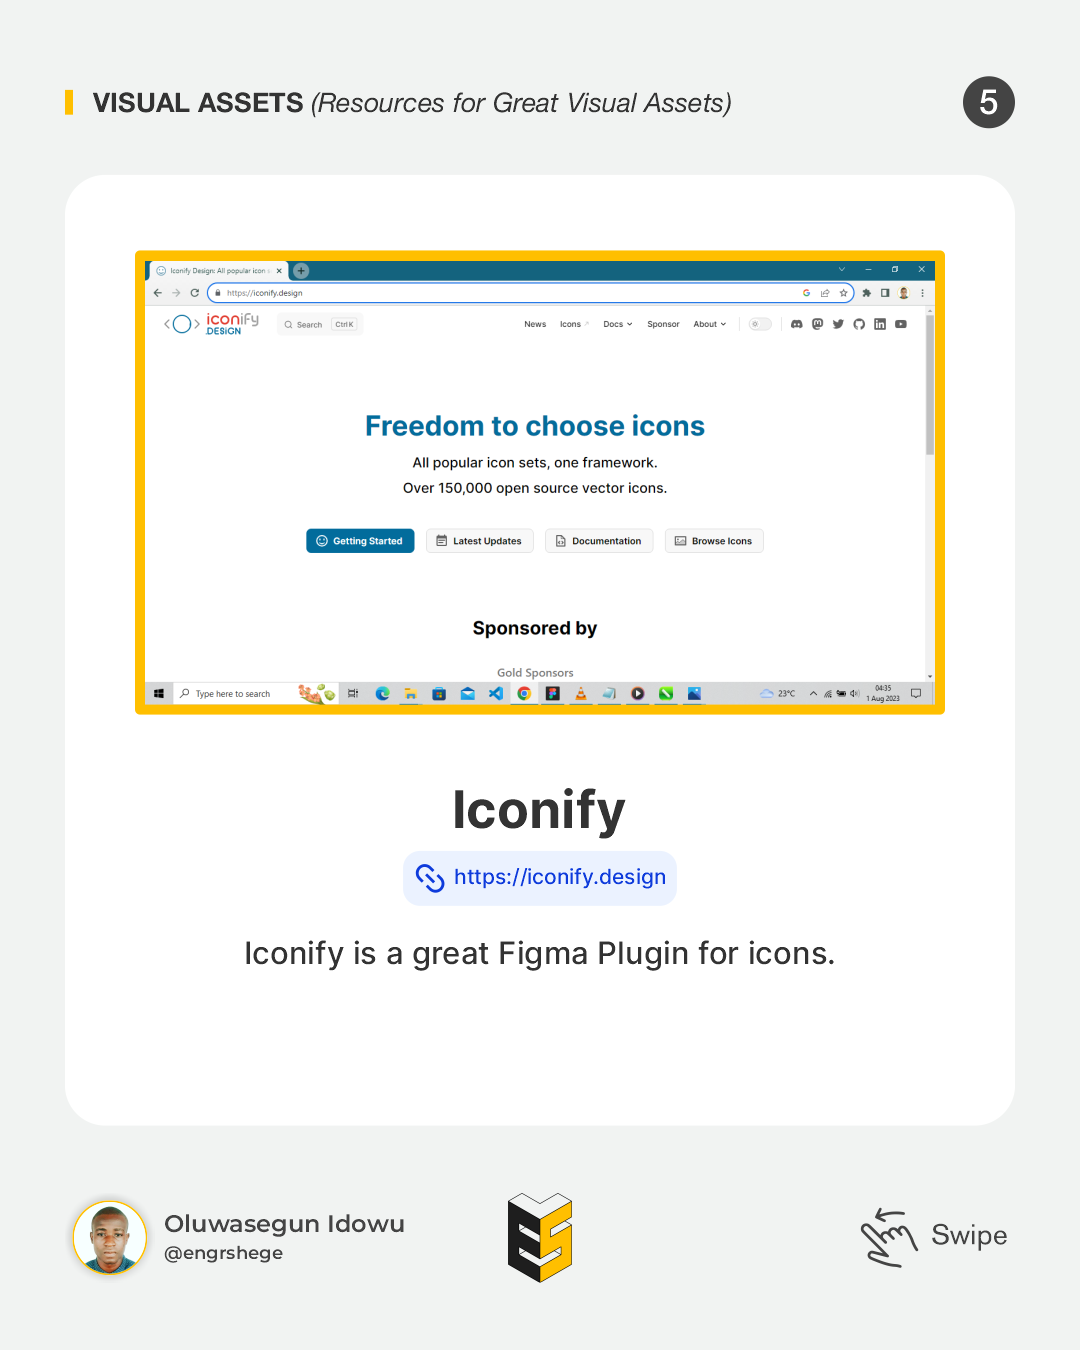 Resources for Icons: Iconify